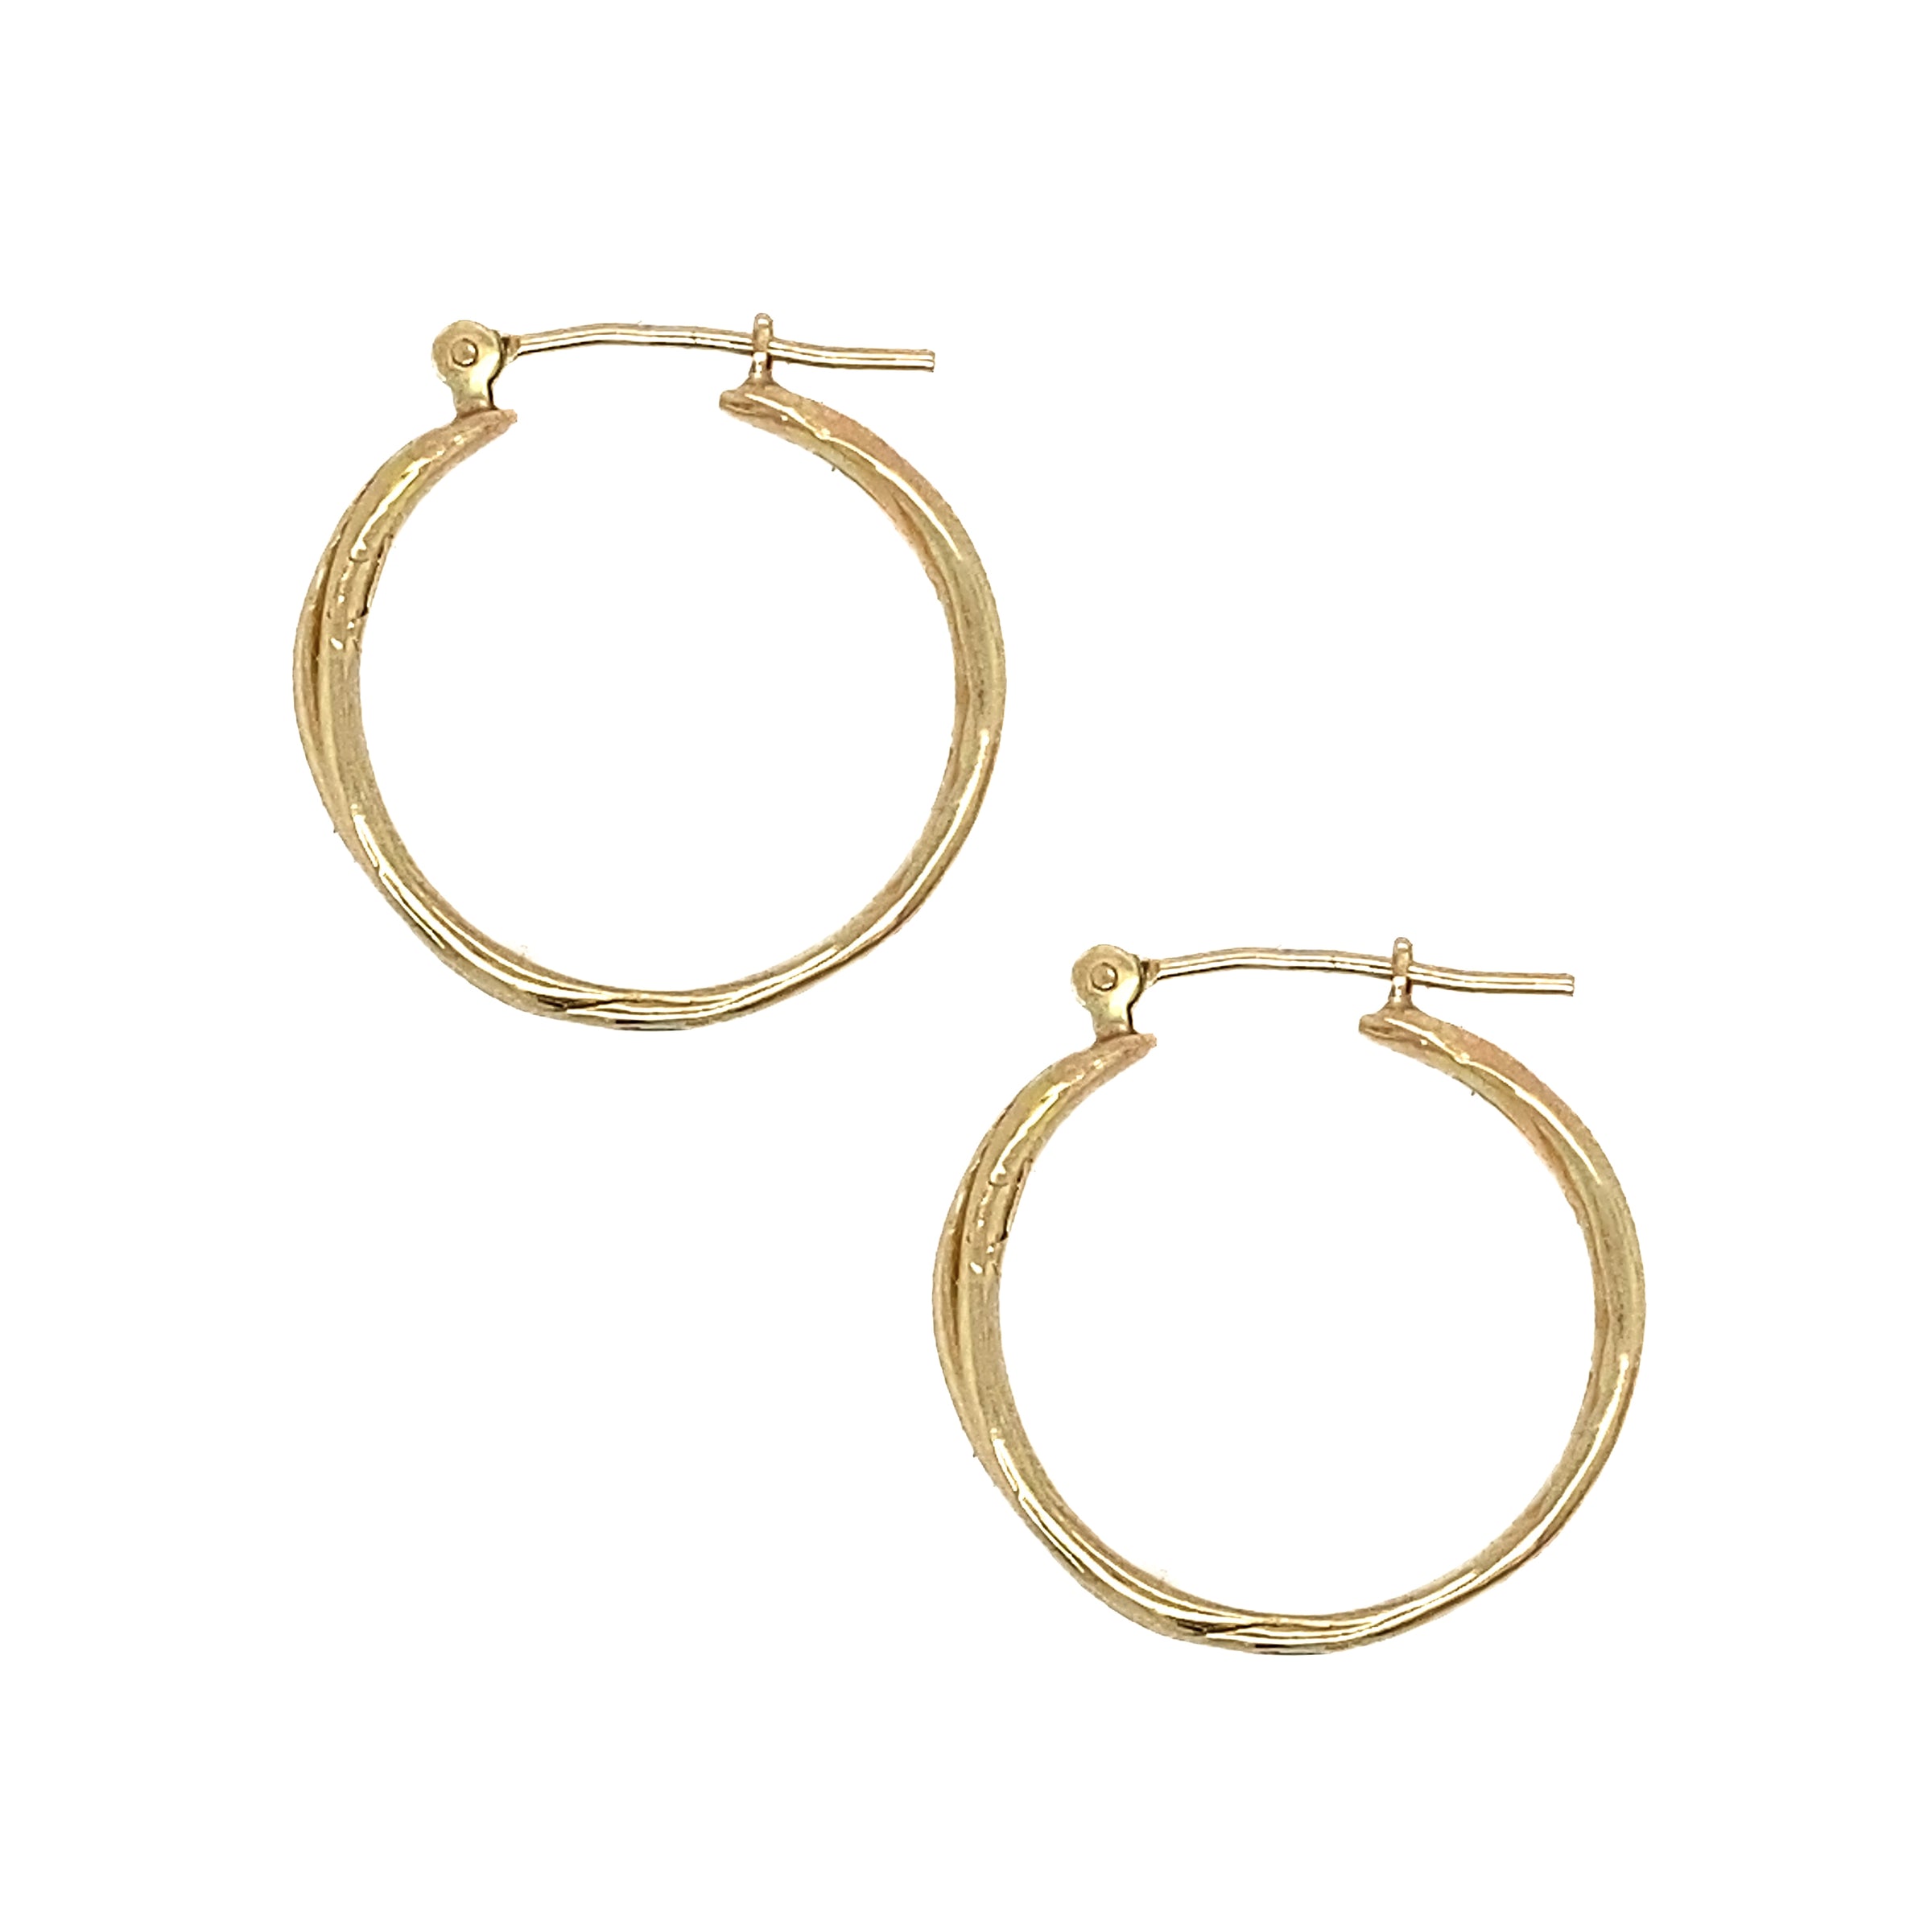 Shop Our Earrings | Emily Amey – Page 2 – Emily Amey